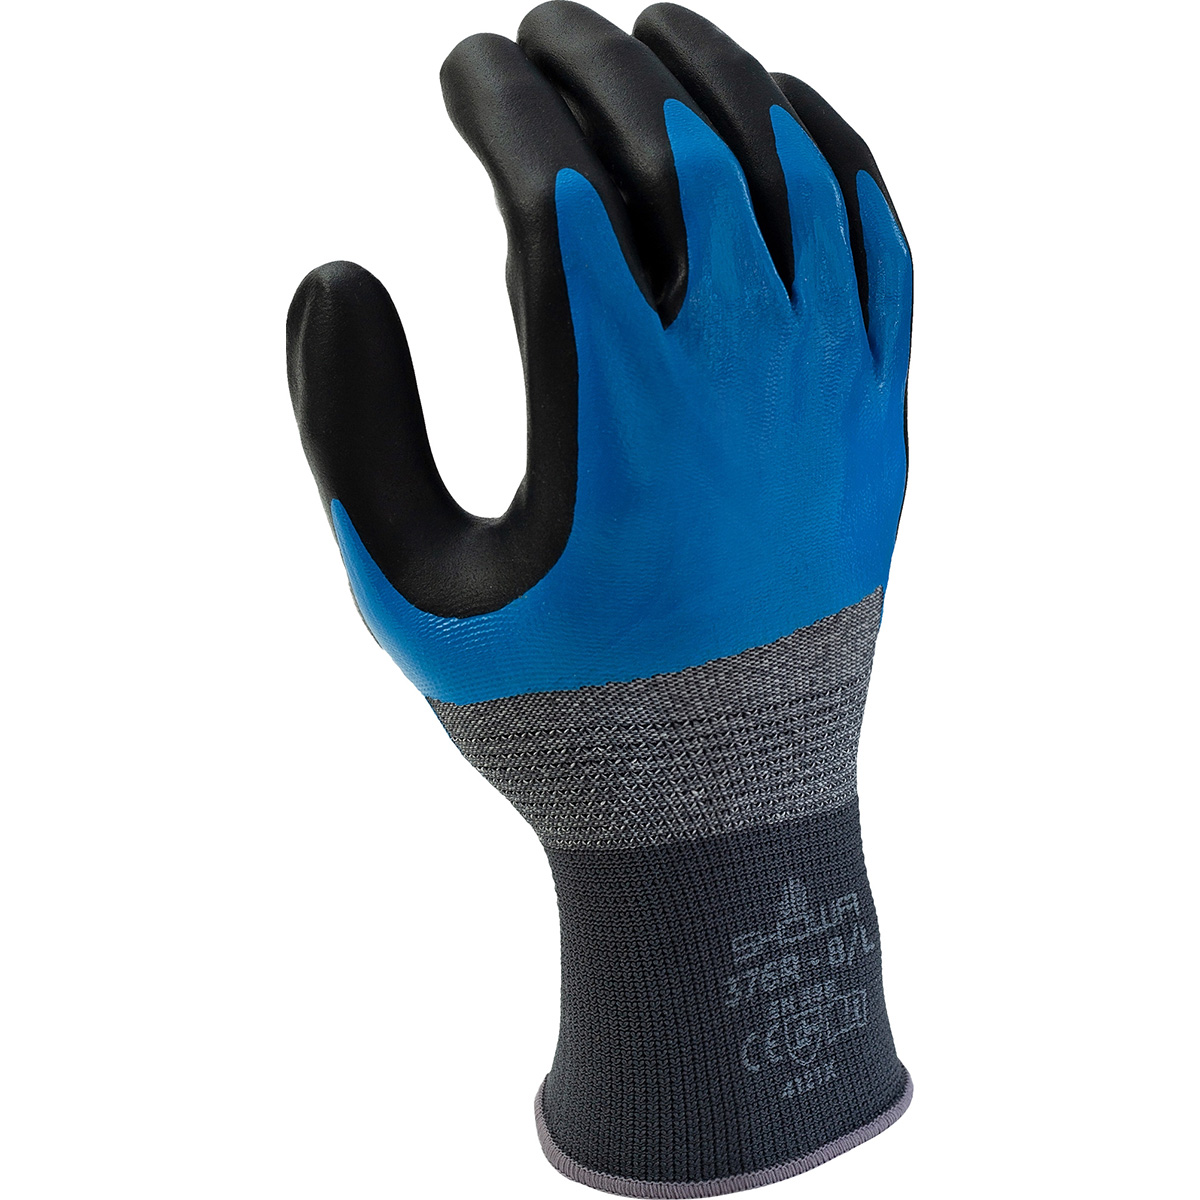 General purpose 3/4 nitrile blue undercoating w/black foamed palm coating, 13 gauge, 3/4 for over knuckle protection,  liquid resistant, seamless knitted liner, extra large